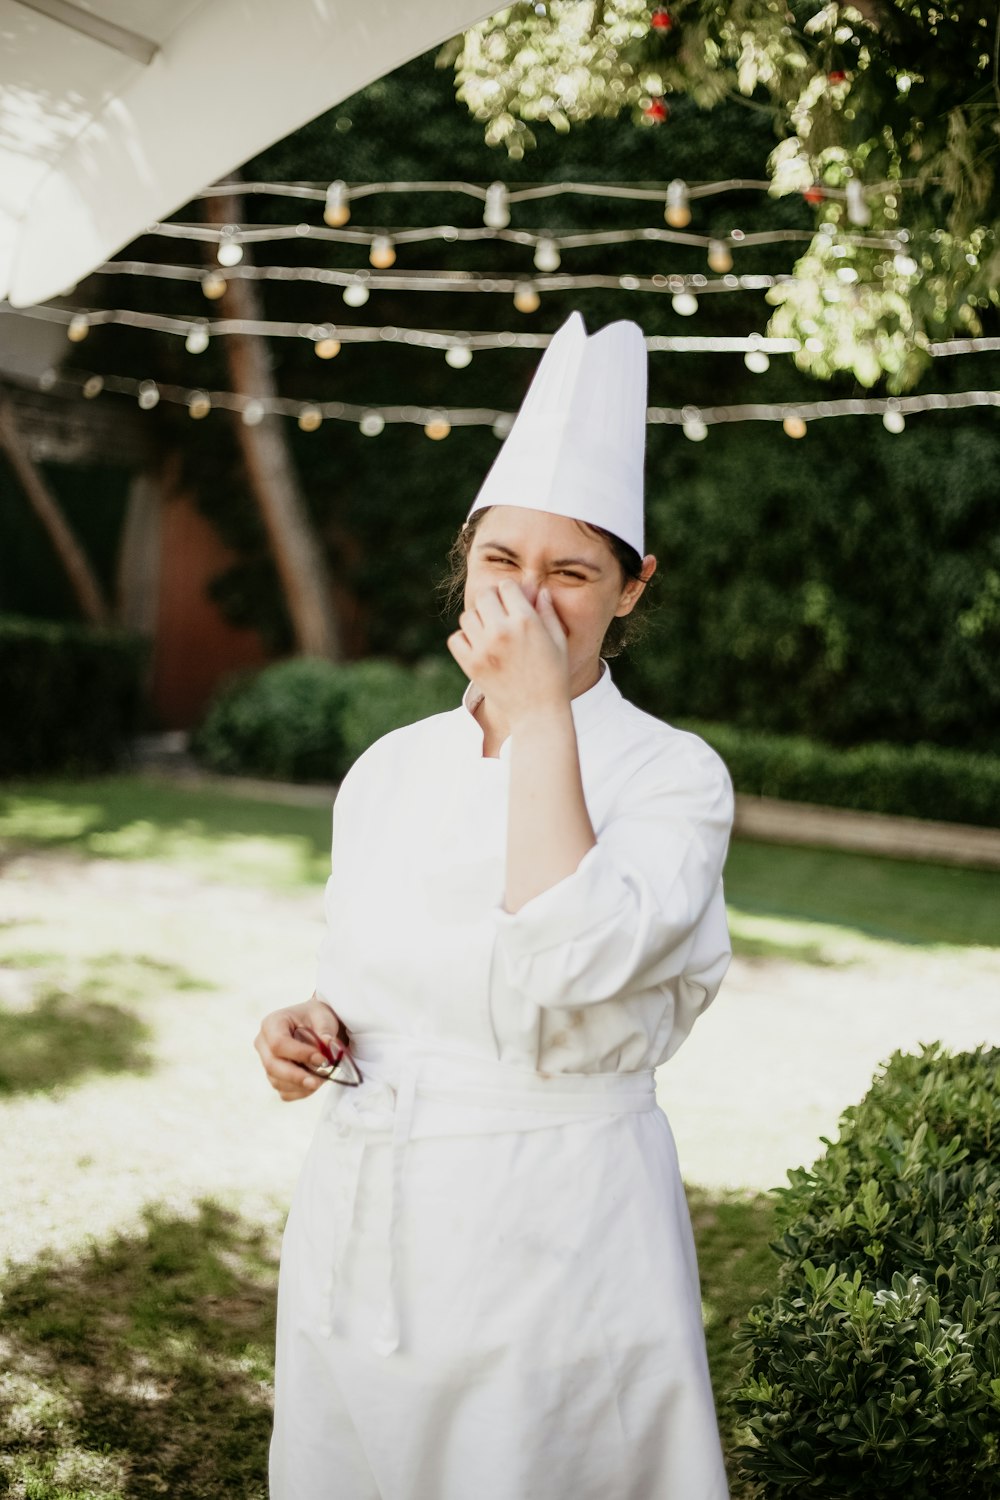 a woman dressed in a chef's outfit standing outside